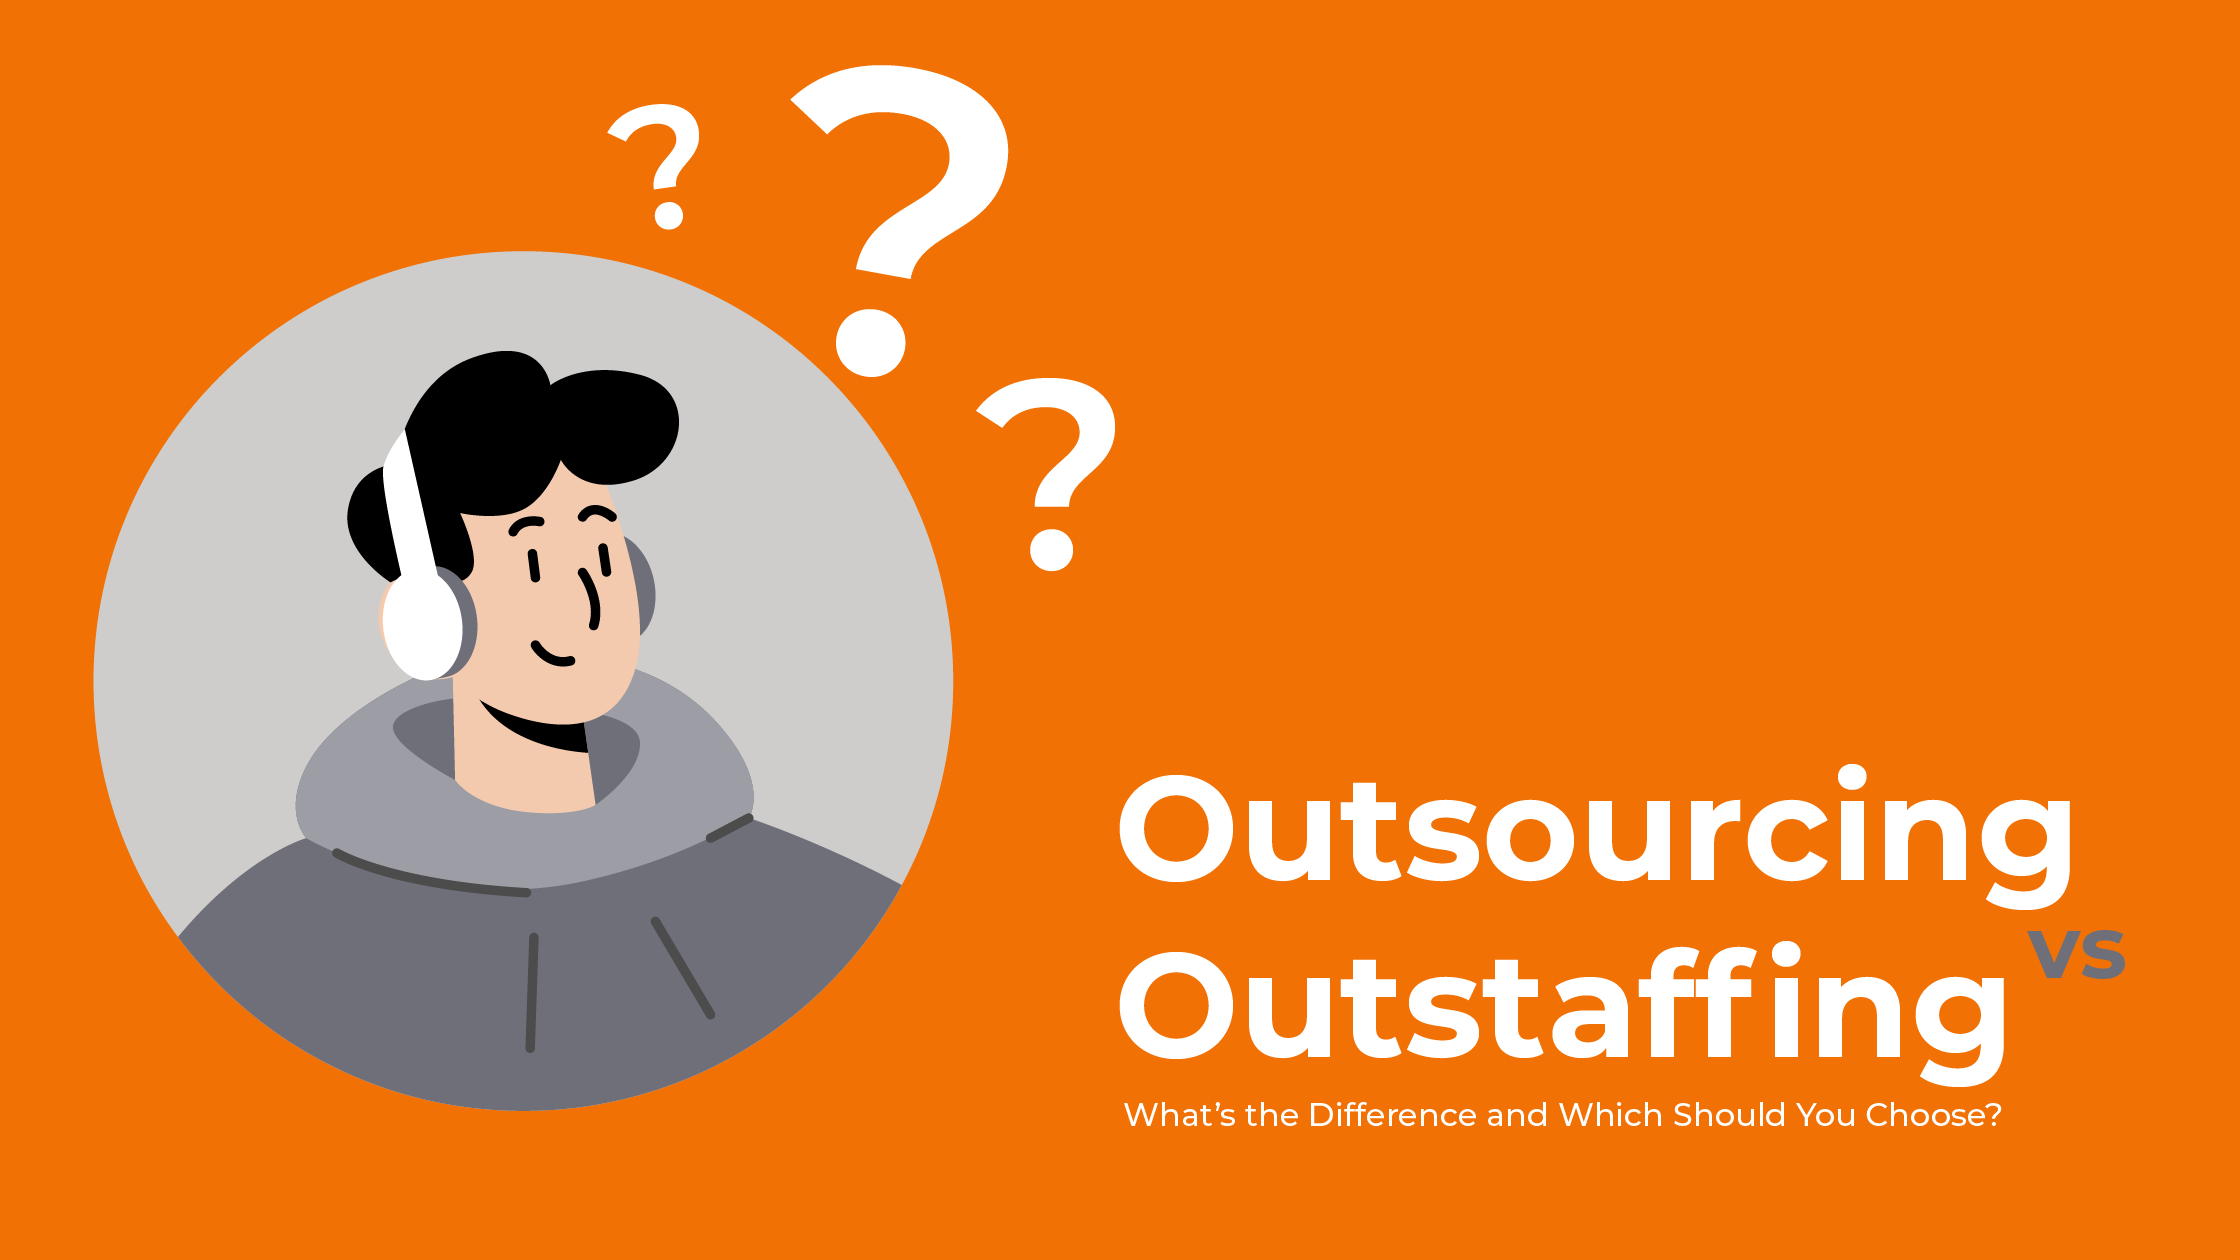 Outsourcing vs Outstaffing: What’s the Difference and Which Should You Choose? 